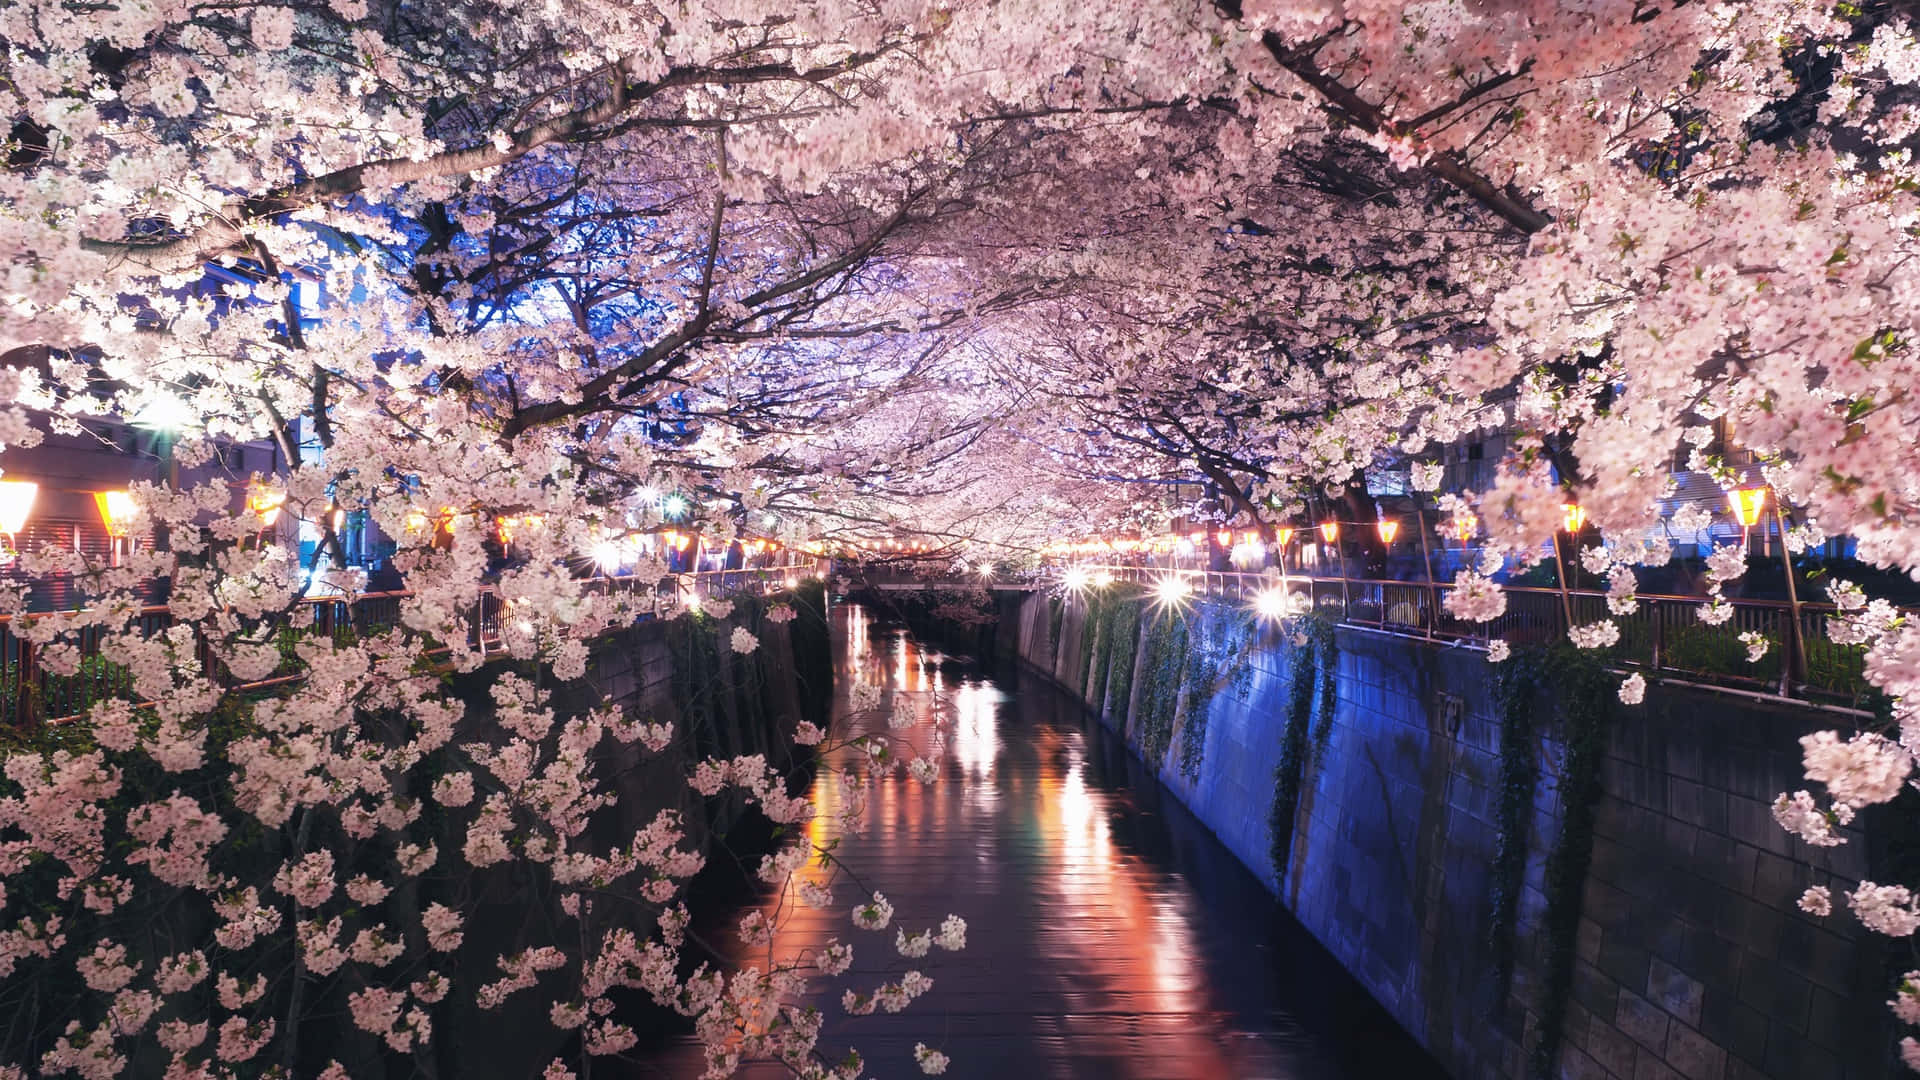 A tranquil night in Japan as cherry blossoms bloom Wallpaper